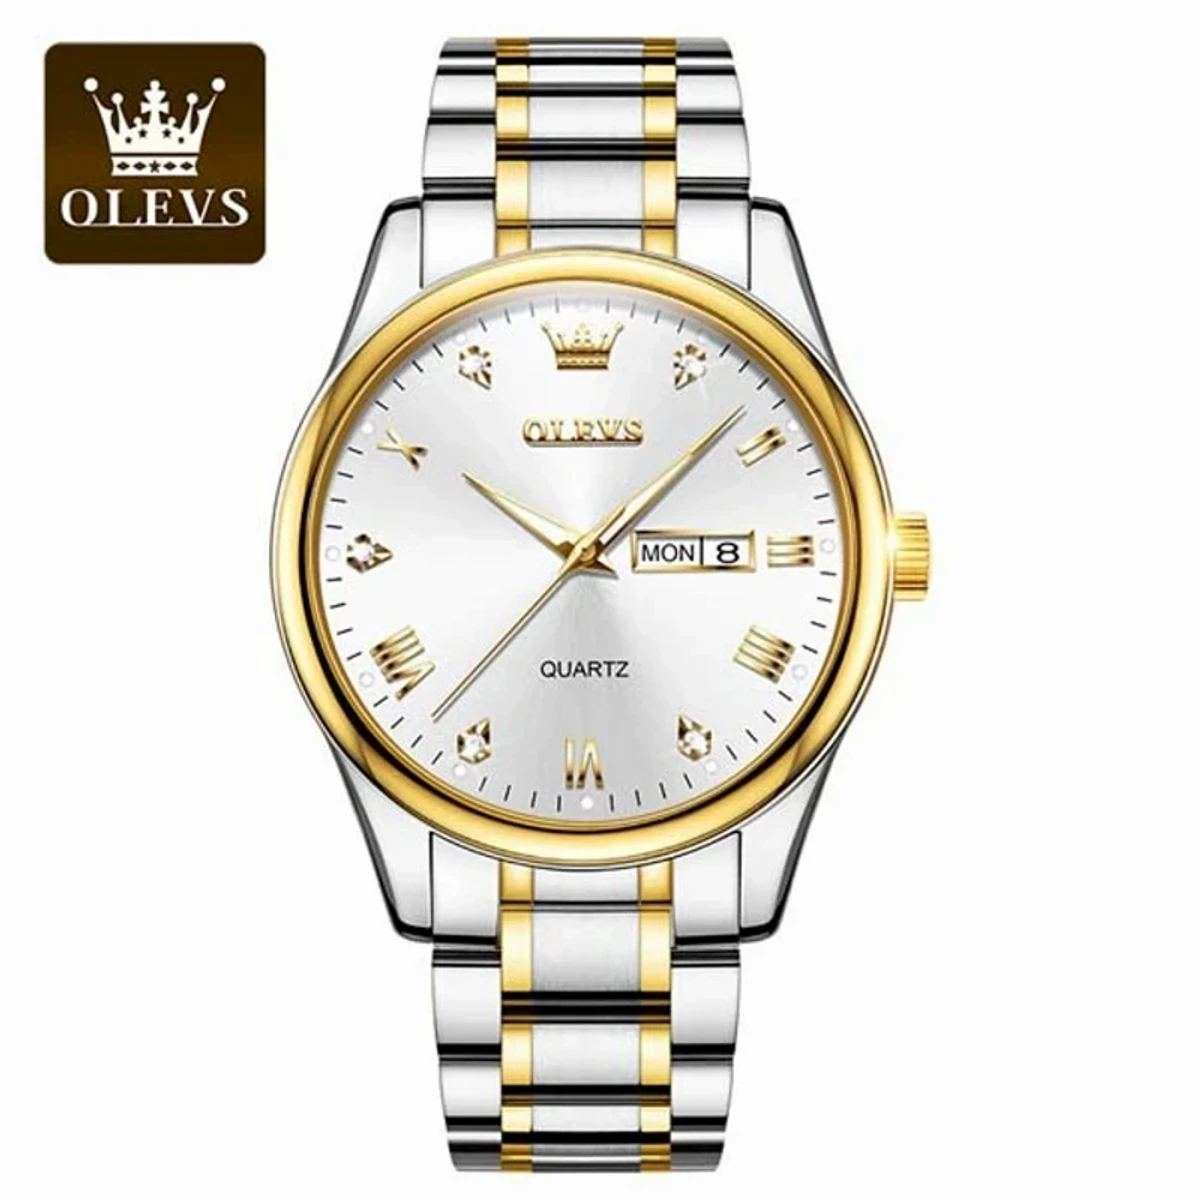 COMBO   WATCH OLEVS MODEL 5563 TOP BRAND LB01 OLEVS WATCH COMBO TOTON AR DIAL  WHITE 2PS WATCH